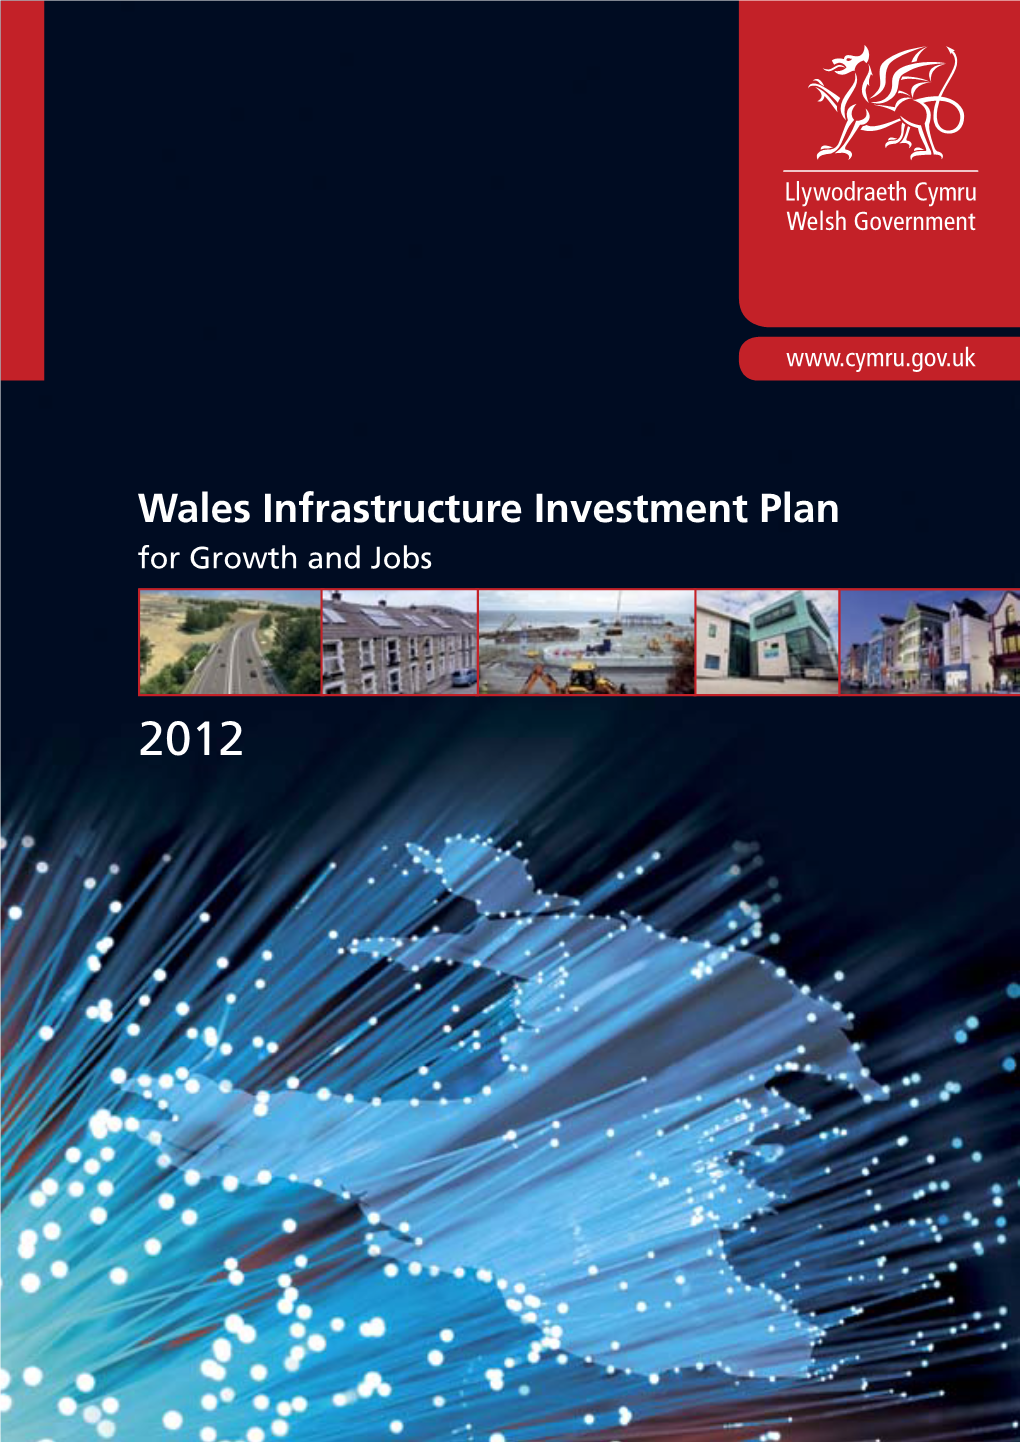 Wales Infrastructure Investment Plan for Growth and Jobs